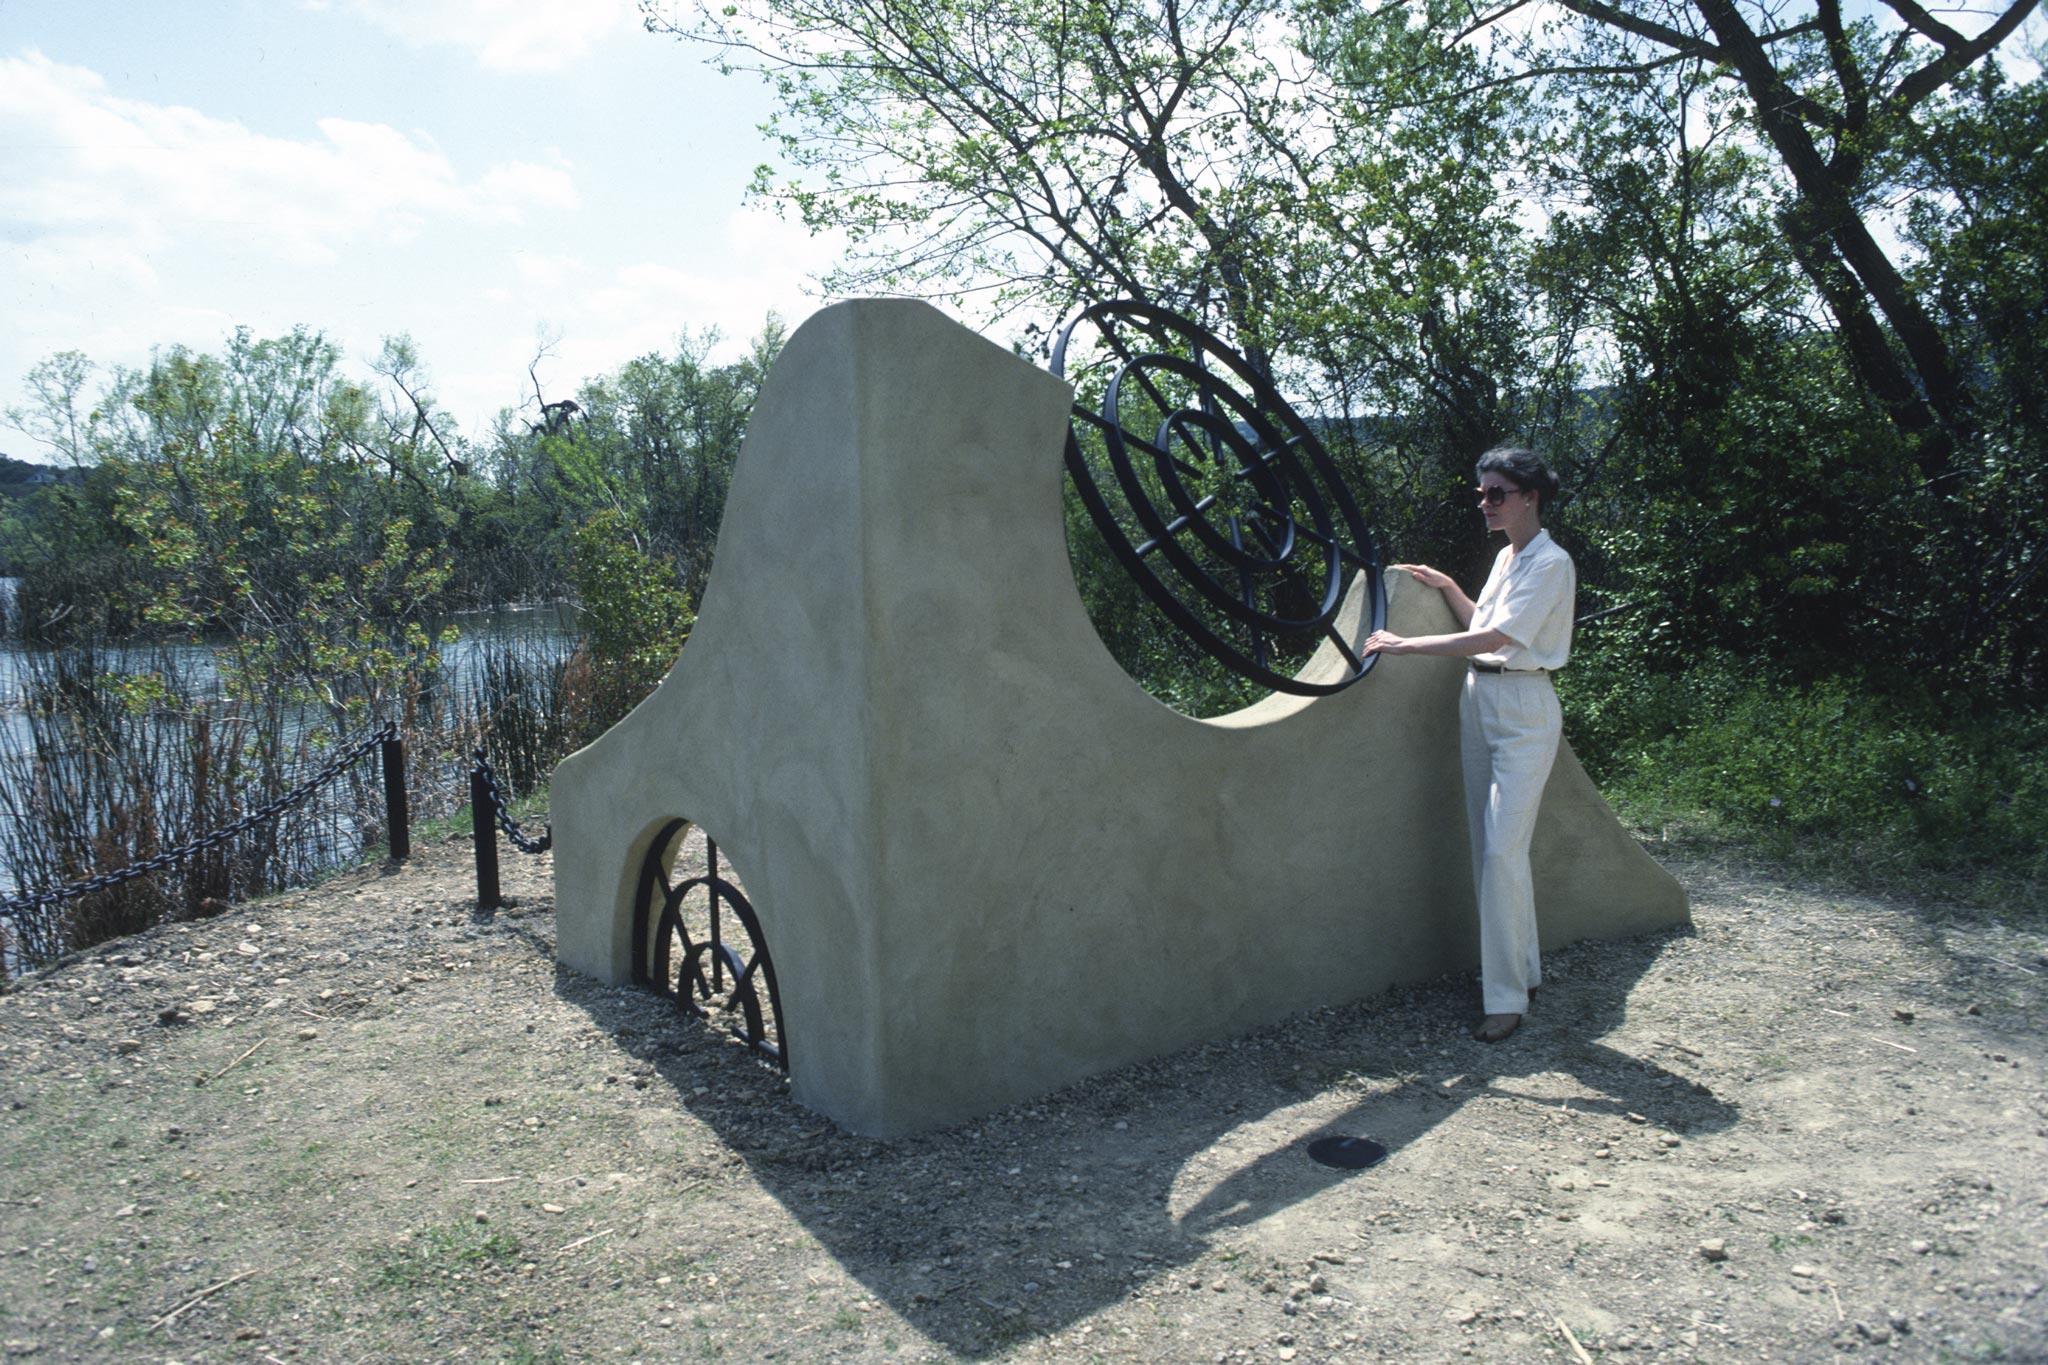 person stands next to a short undulating stucco wall with two round metal grates incorporated into the structure built on a lush lake shoreline